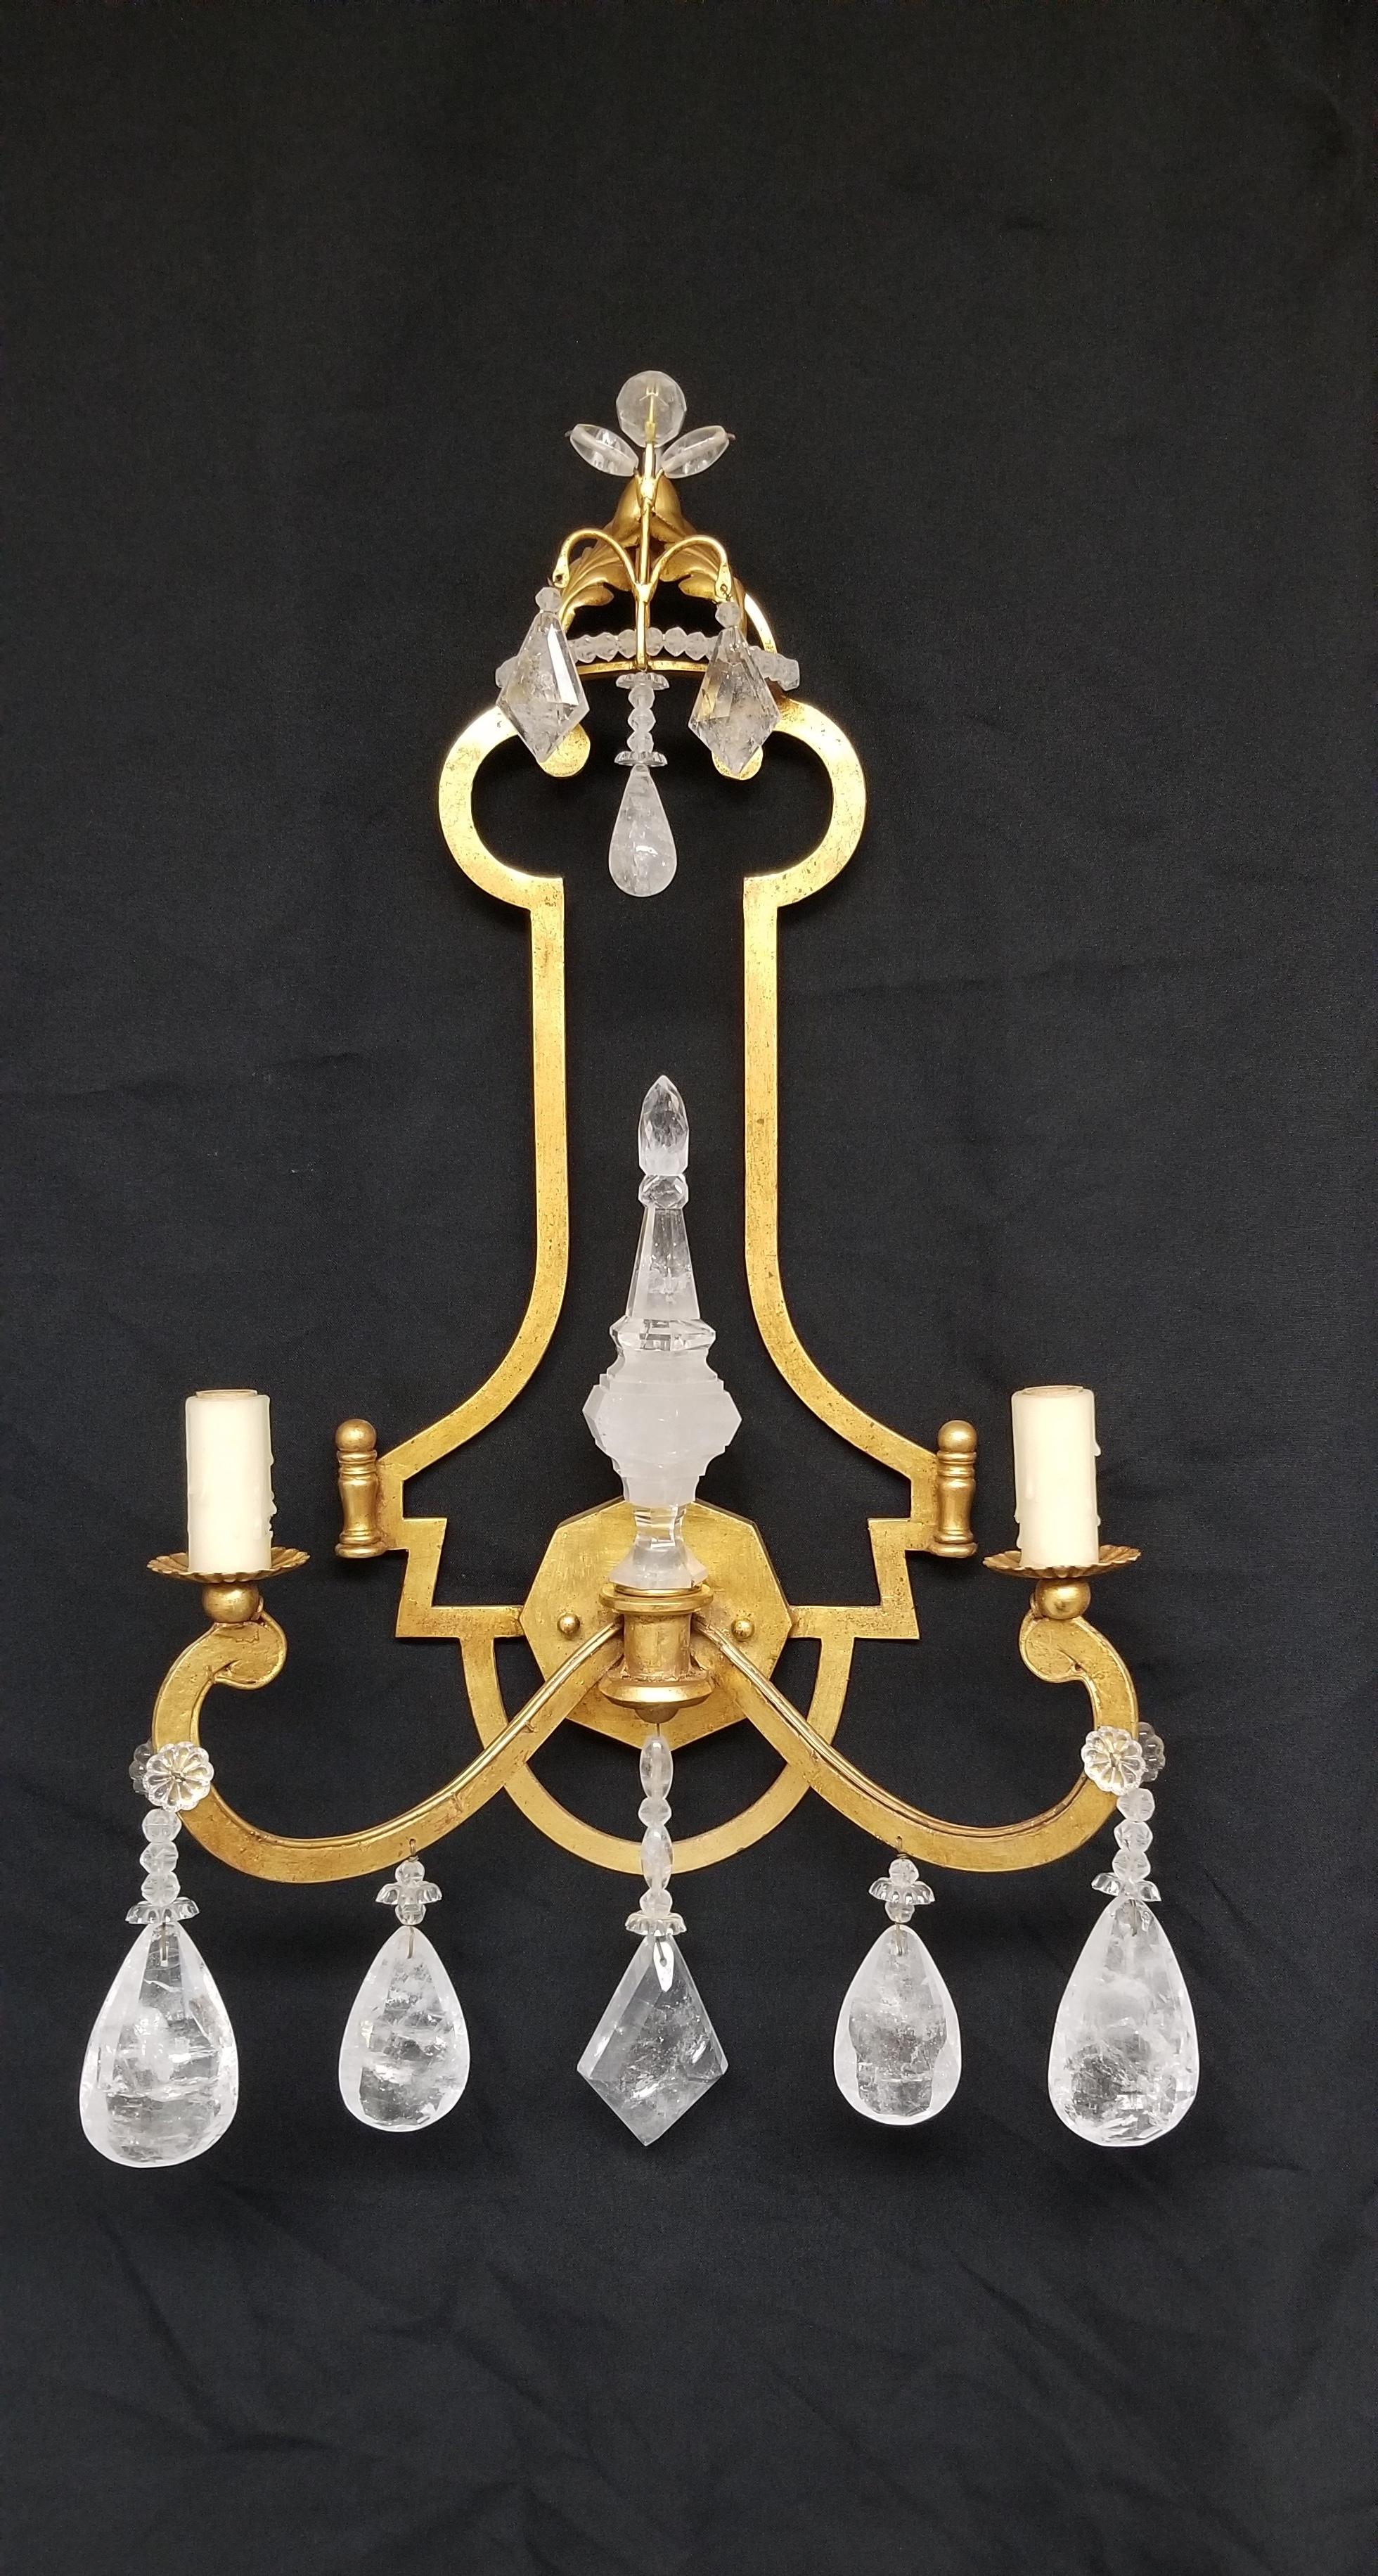 Pair of Rock Crystal Sconces with 22K Gold Leaf In Good Condition For Sale In Cypress, CA